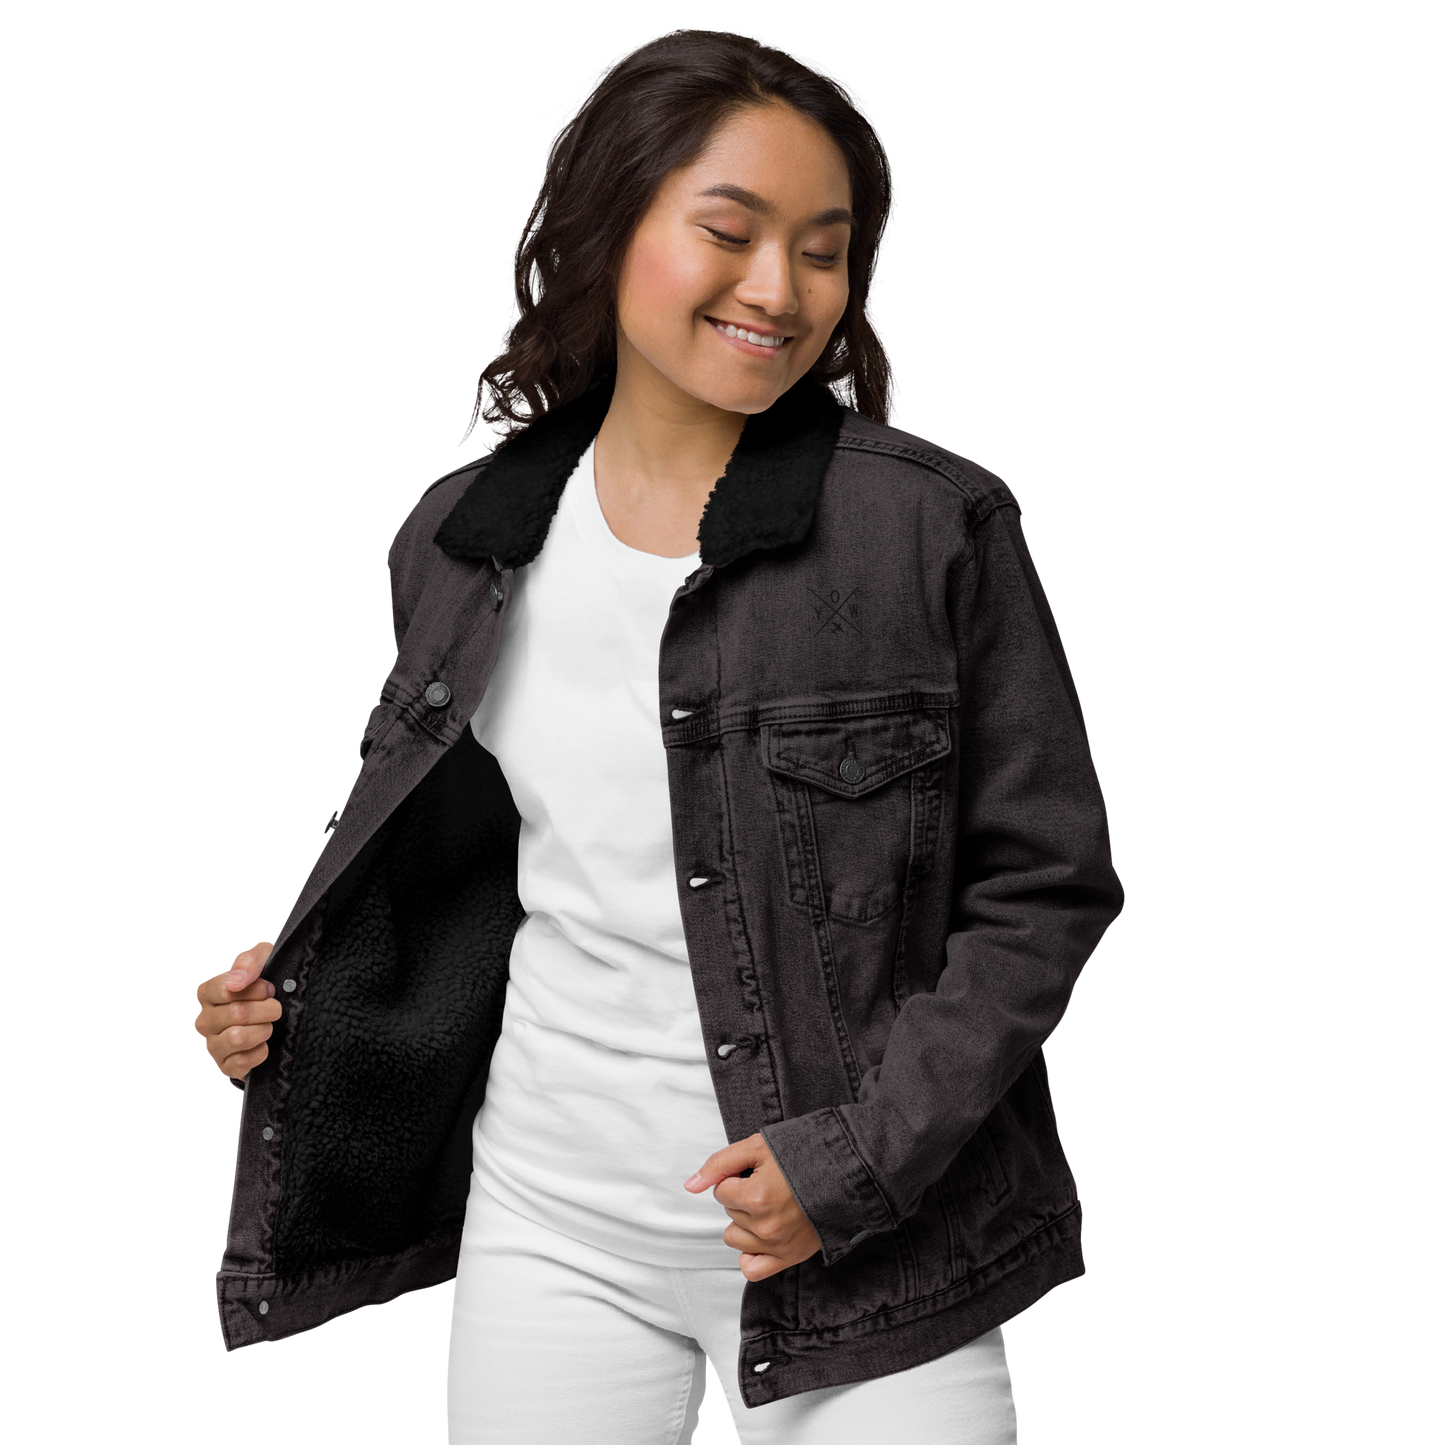 YHM Designs - YOW Ottawa Denim Sherpa Jacket - Crossed-X Design with Airport Code and Vintage Propliner - Black & White Embroidery - Image 05